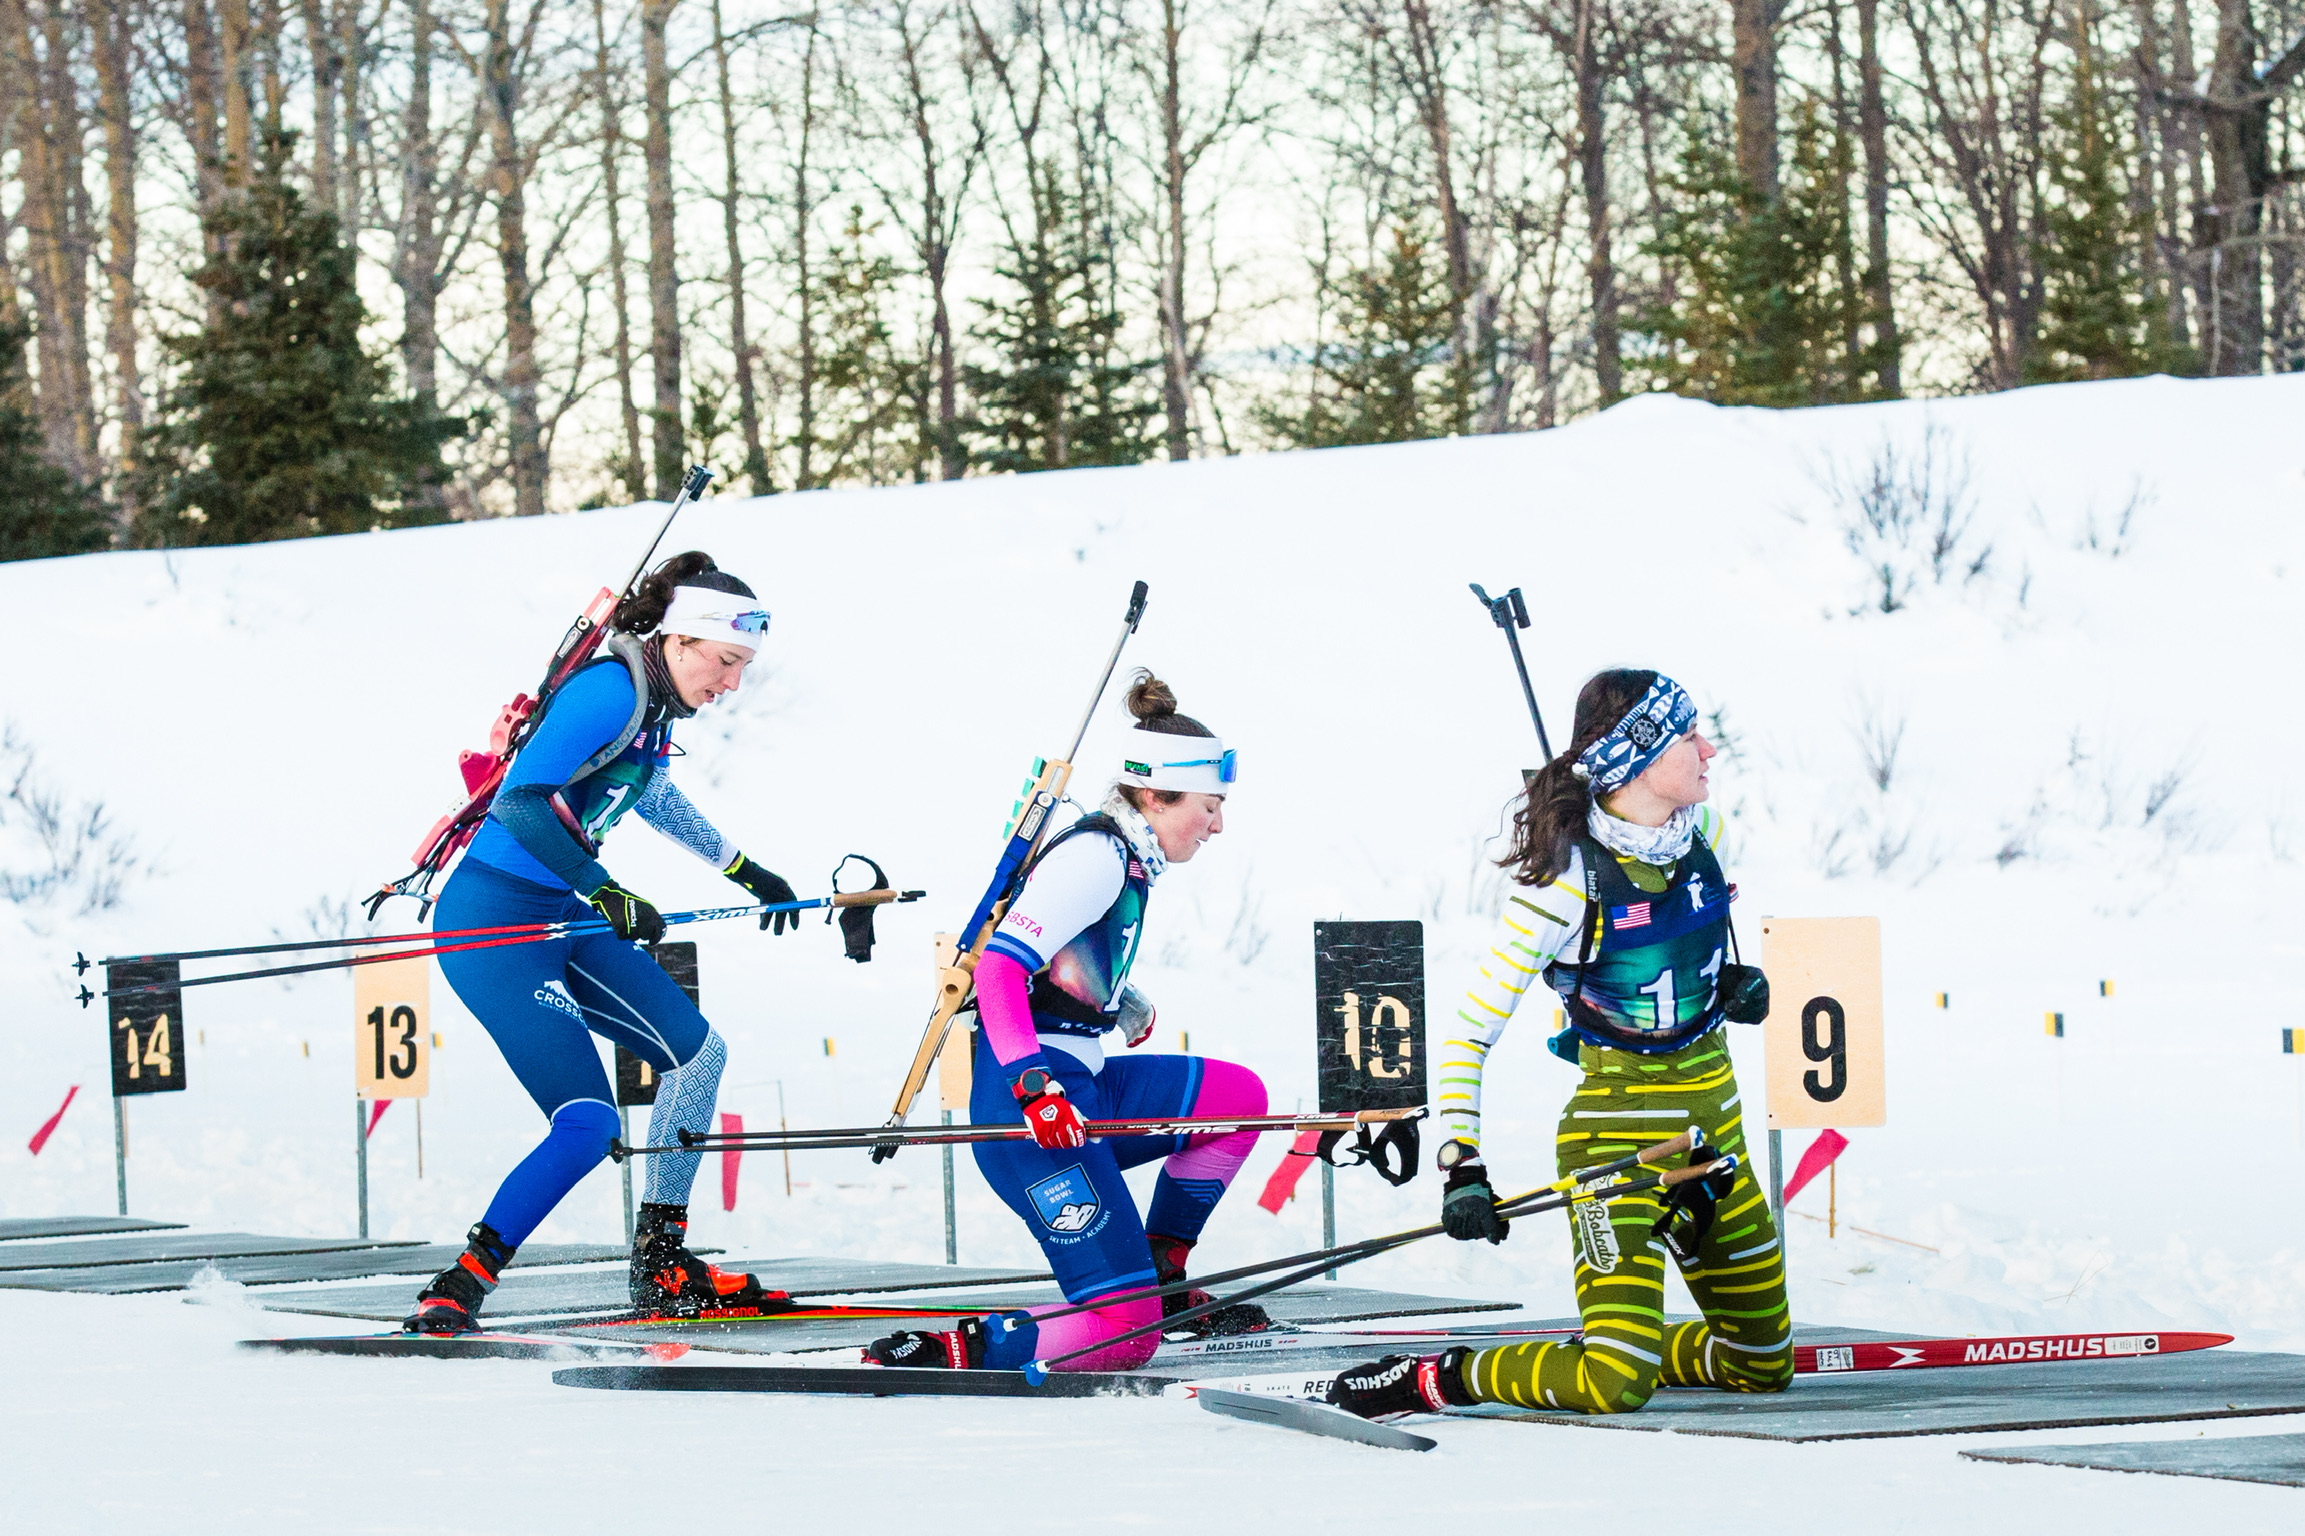 NYSEF and Paul Smiths College Biathlete Dolcie Tanguay to Compete in World University Games